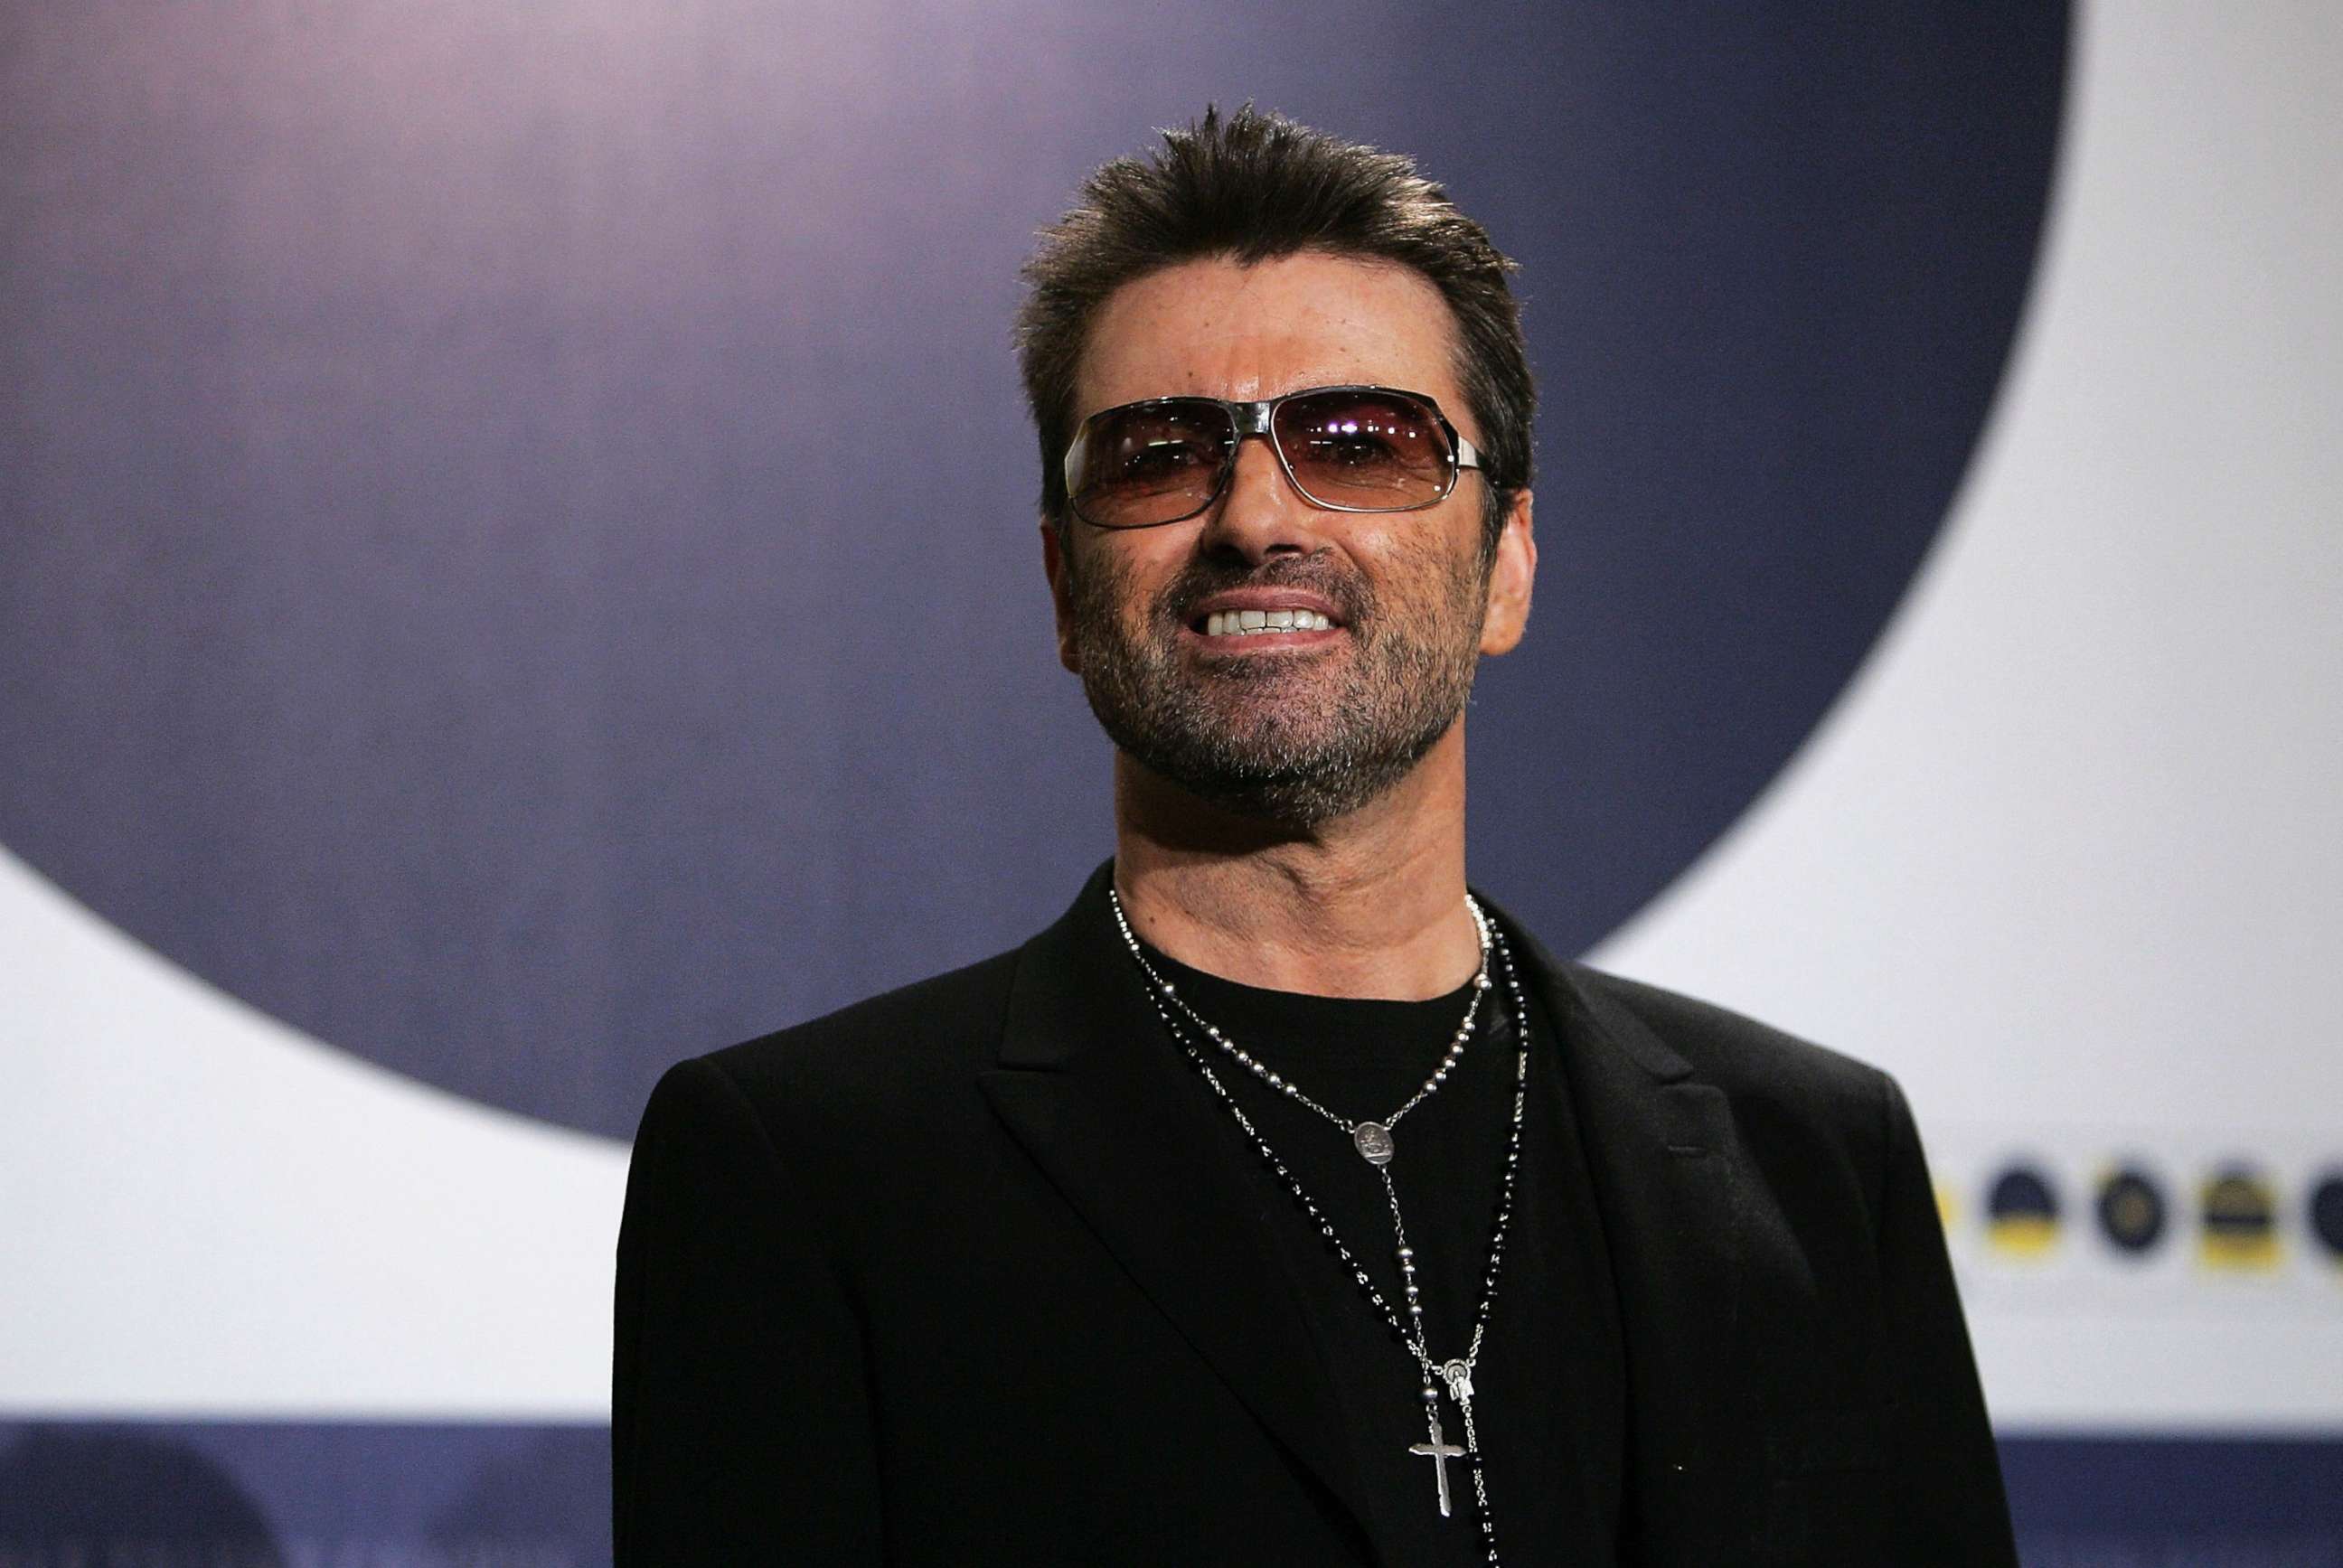 PHOTO: Singer George Michael poses at the "George Michael: A Different Story" photocall during the 55th annual Berlinale International Film Festival, Feb. 16, 200,5 in Berlin.